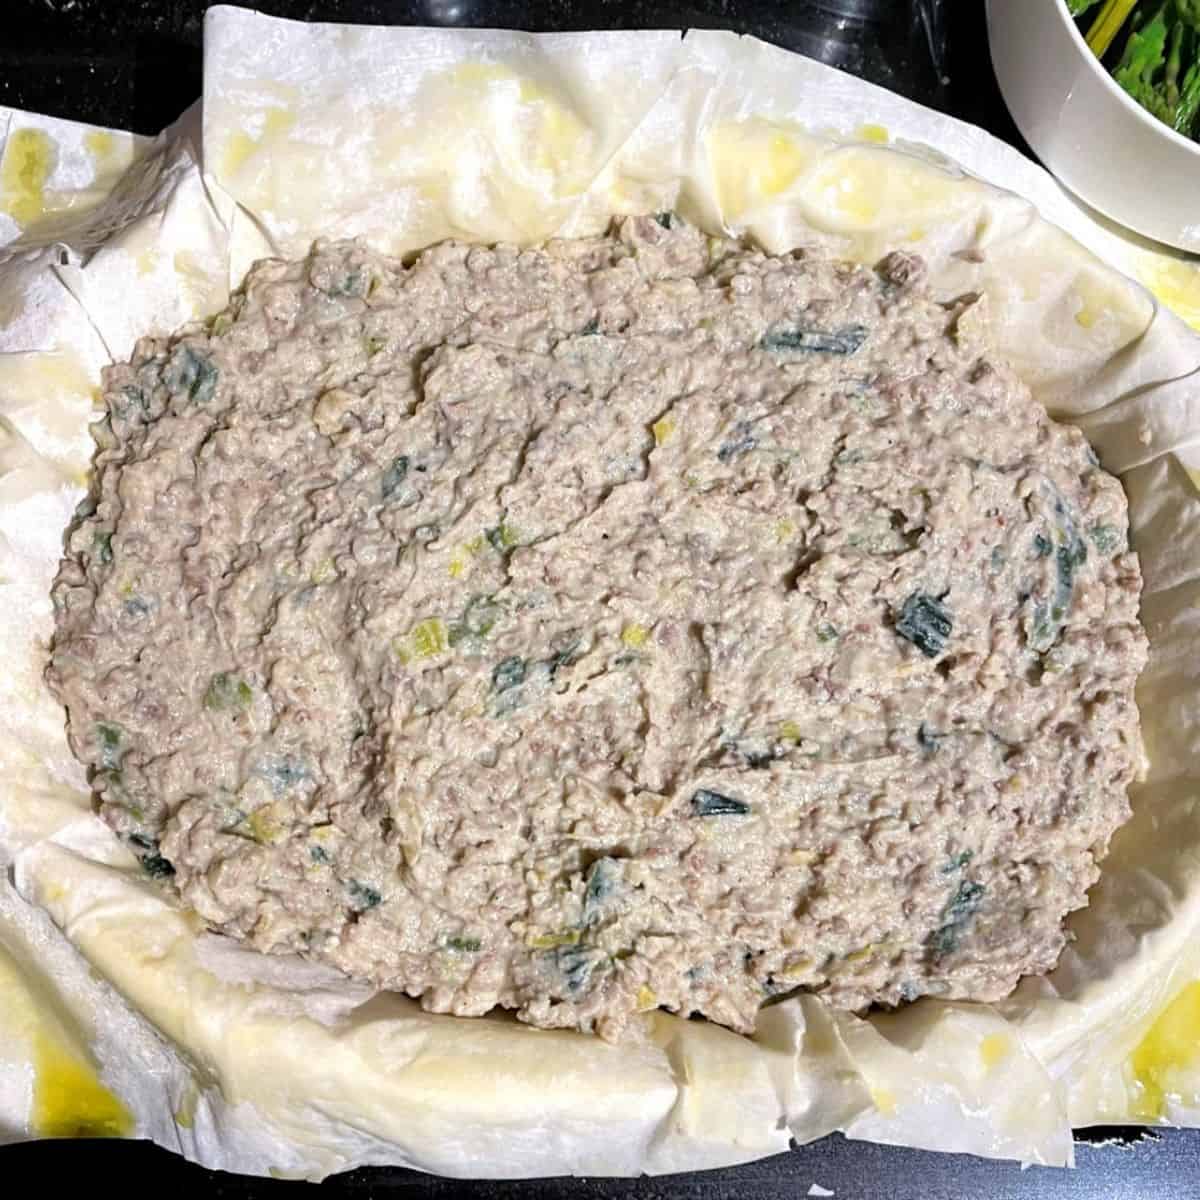 Mashed potato and vegan meat filling in filo pastry in baking dish.